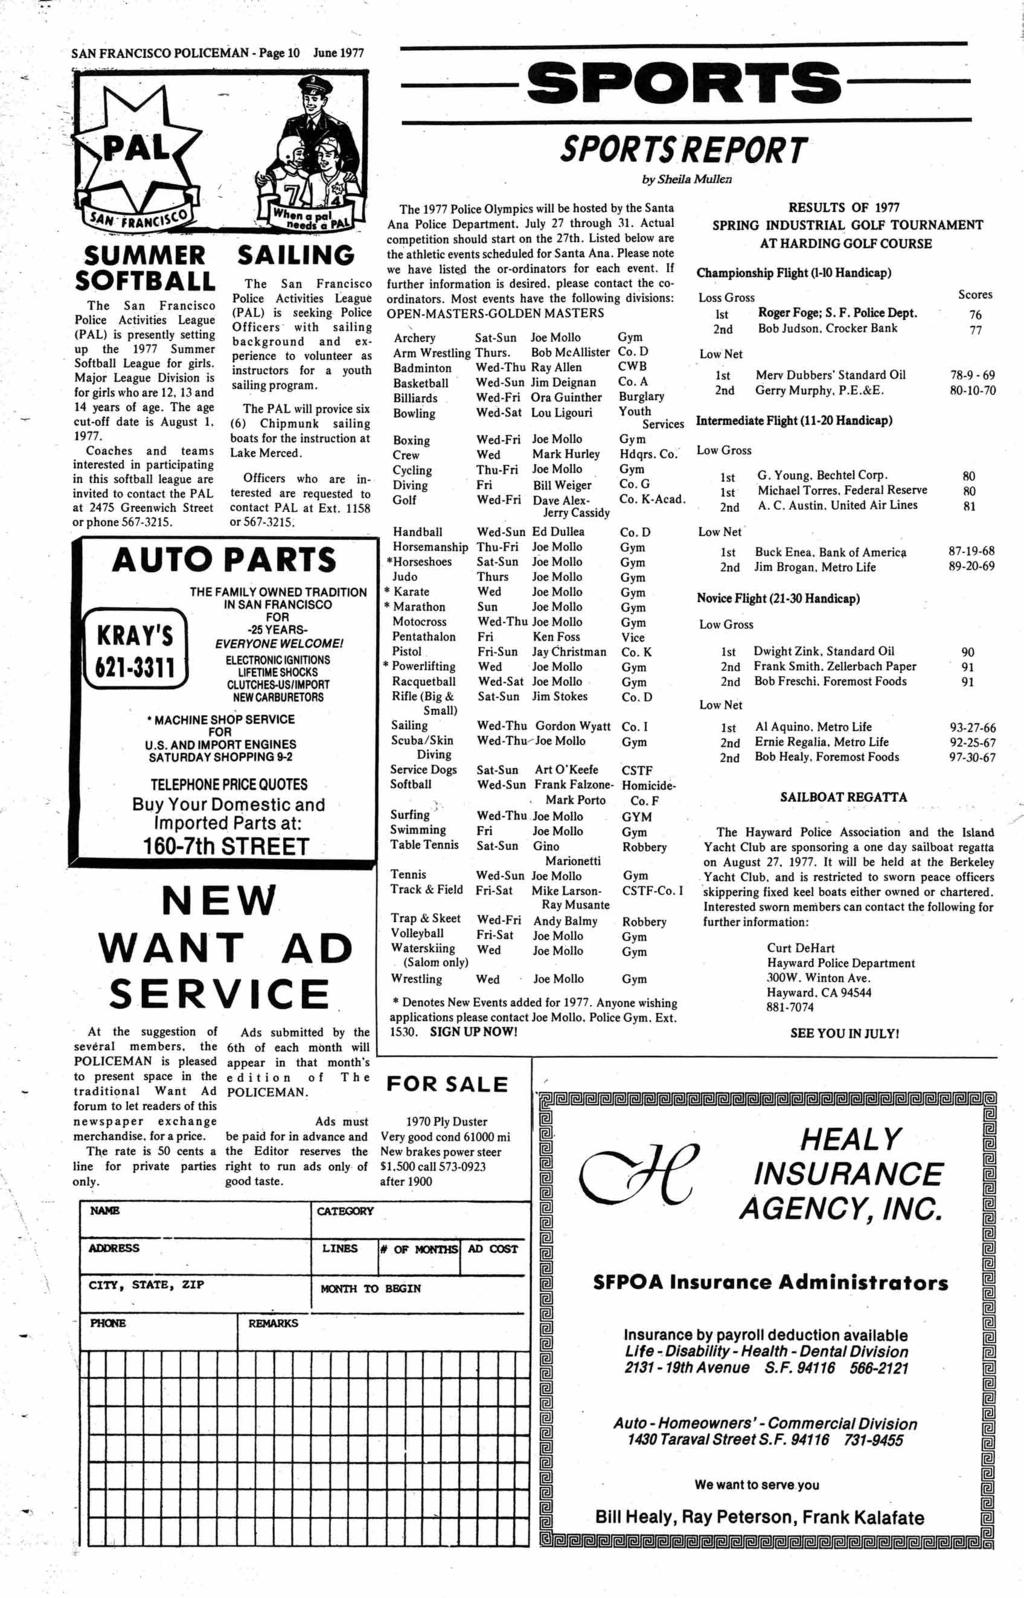 SAN FRANCSCO POLCEMAN - Page 10 June 1977 SPORTS SPORTSREPORT by Sheila Mullen SUMMER SOFTBALL The San Francisco Police Activities League (PAL) is presently setting up the 1977 Summer Softball League